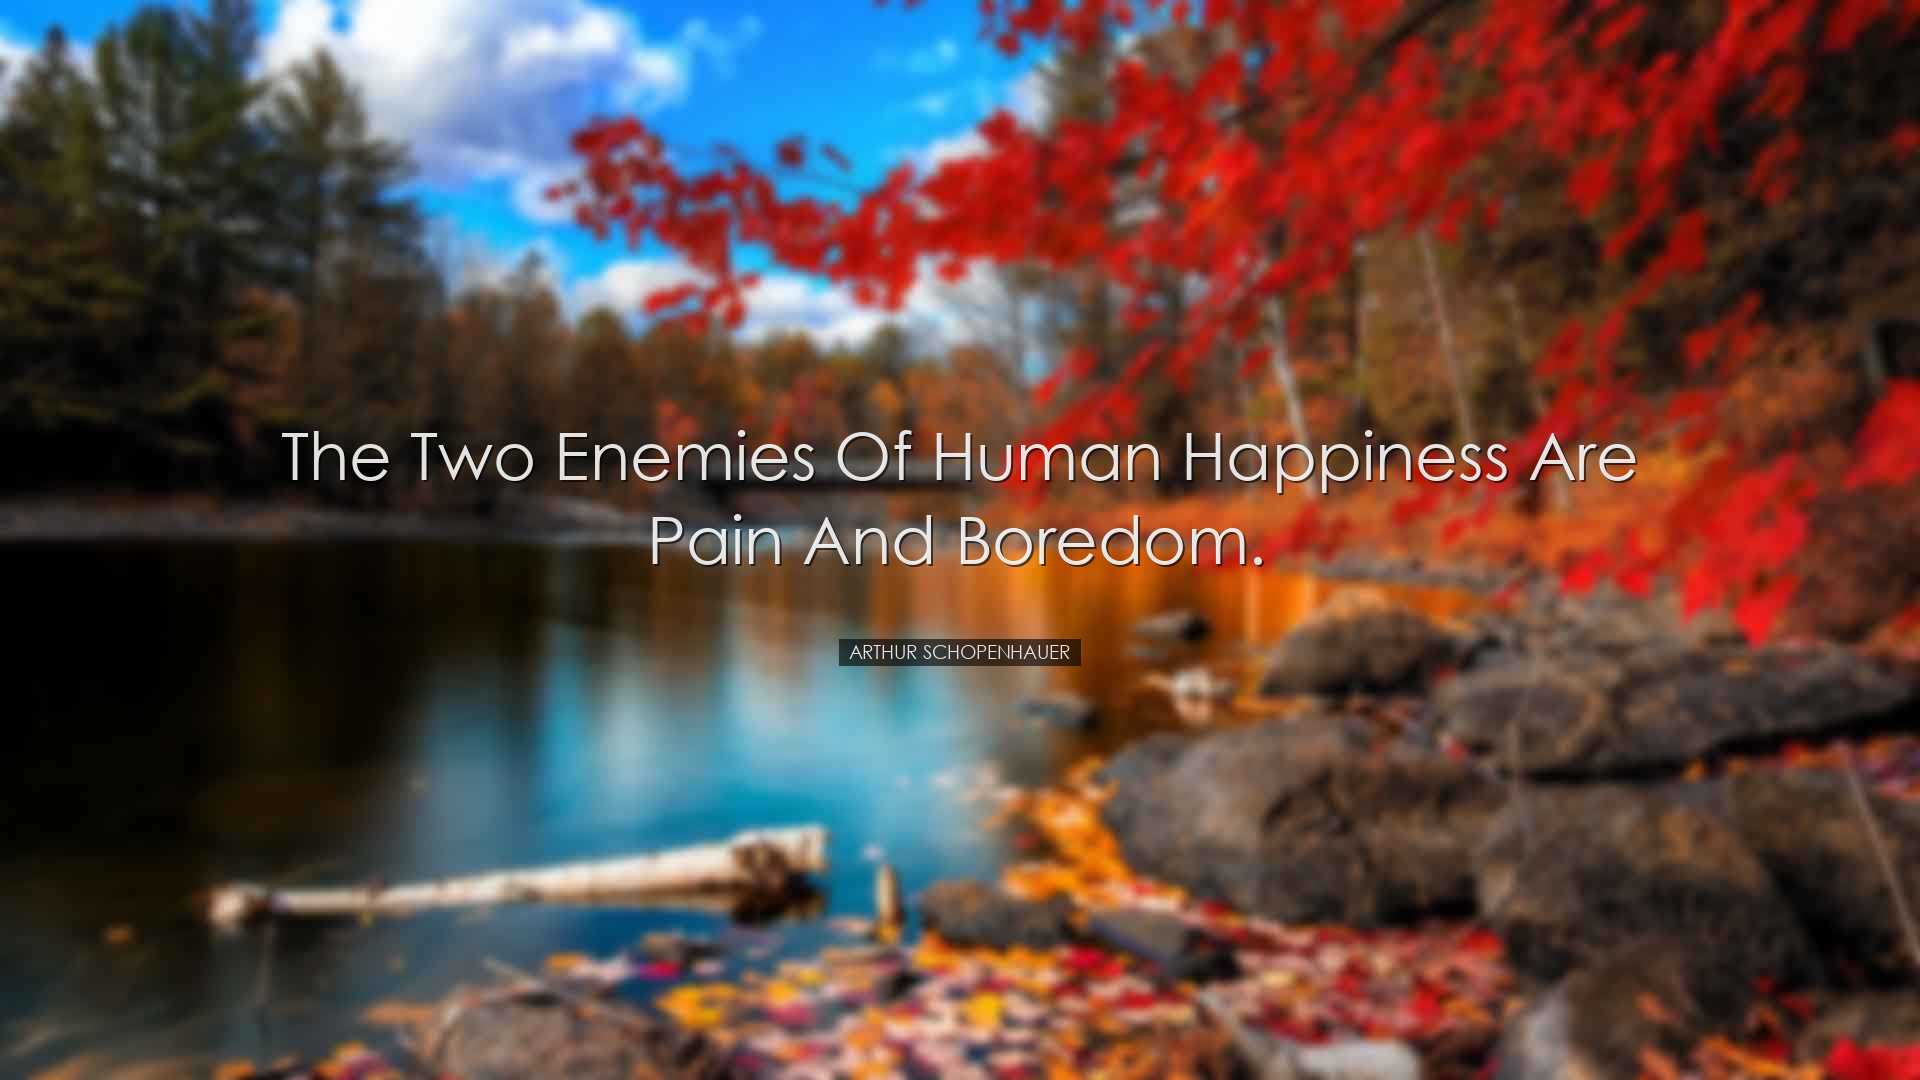 The two enemies of human happiness are pain and boredom. - Arthur